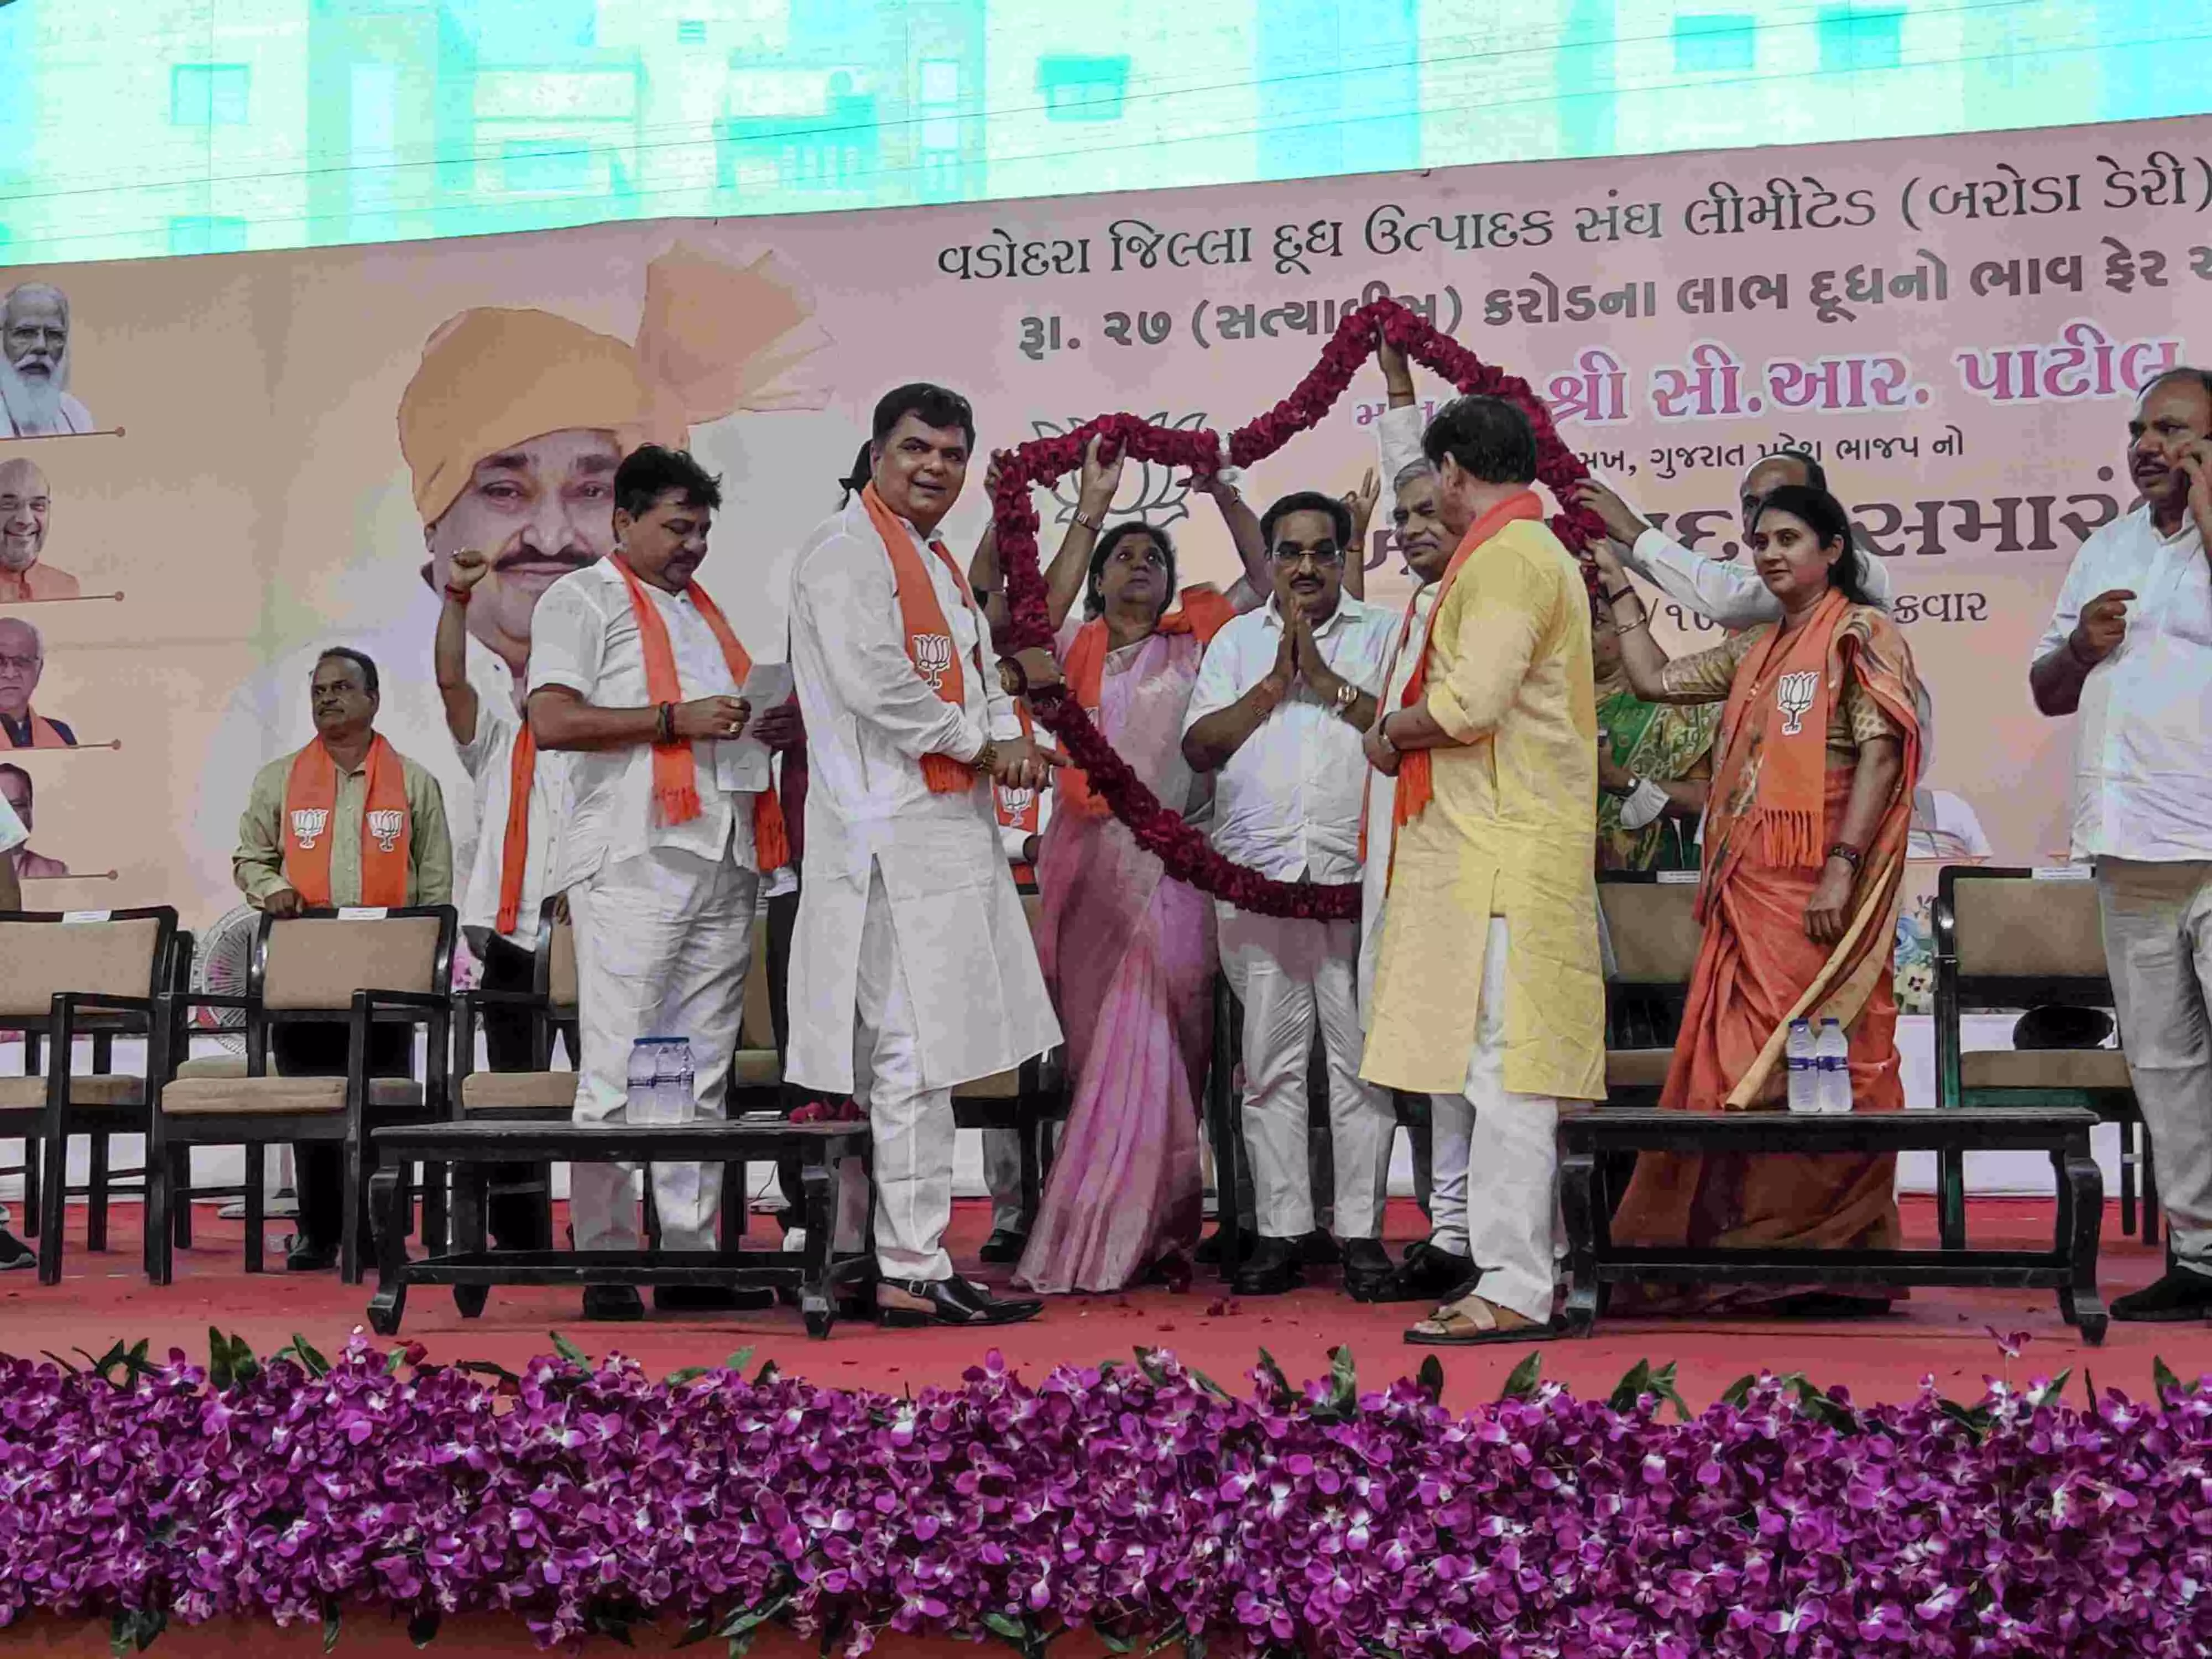 Greeting ceremony of BJP Gujarat President C.R. Patil by milk producers of Baroda Dairy for 27 crore payment of milk price